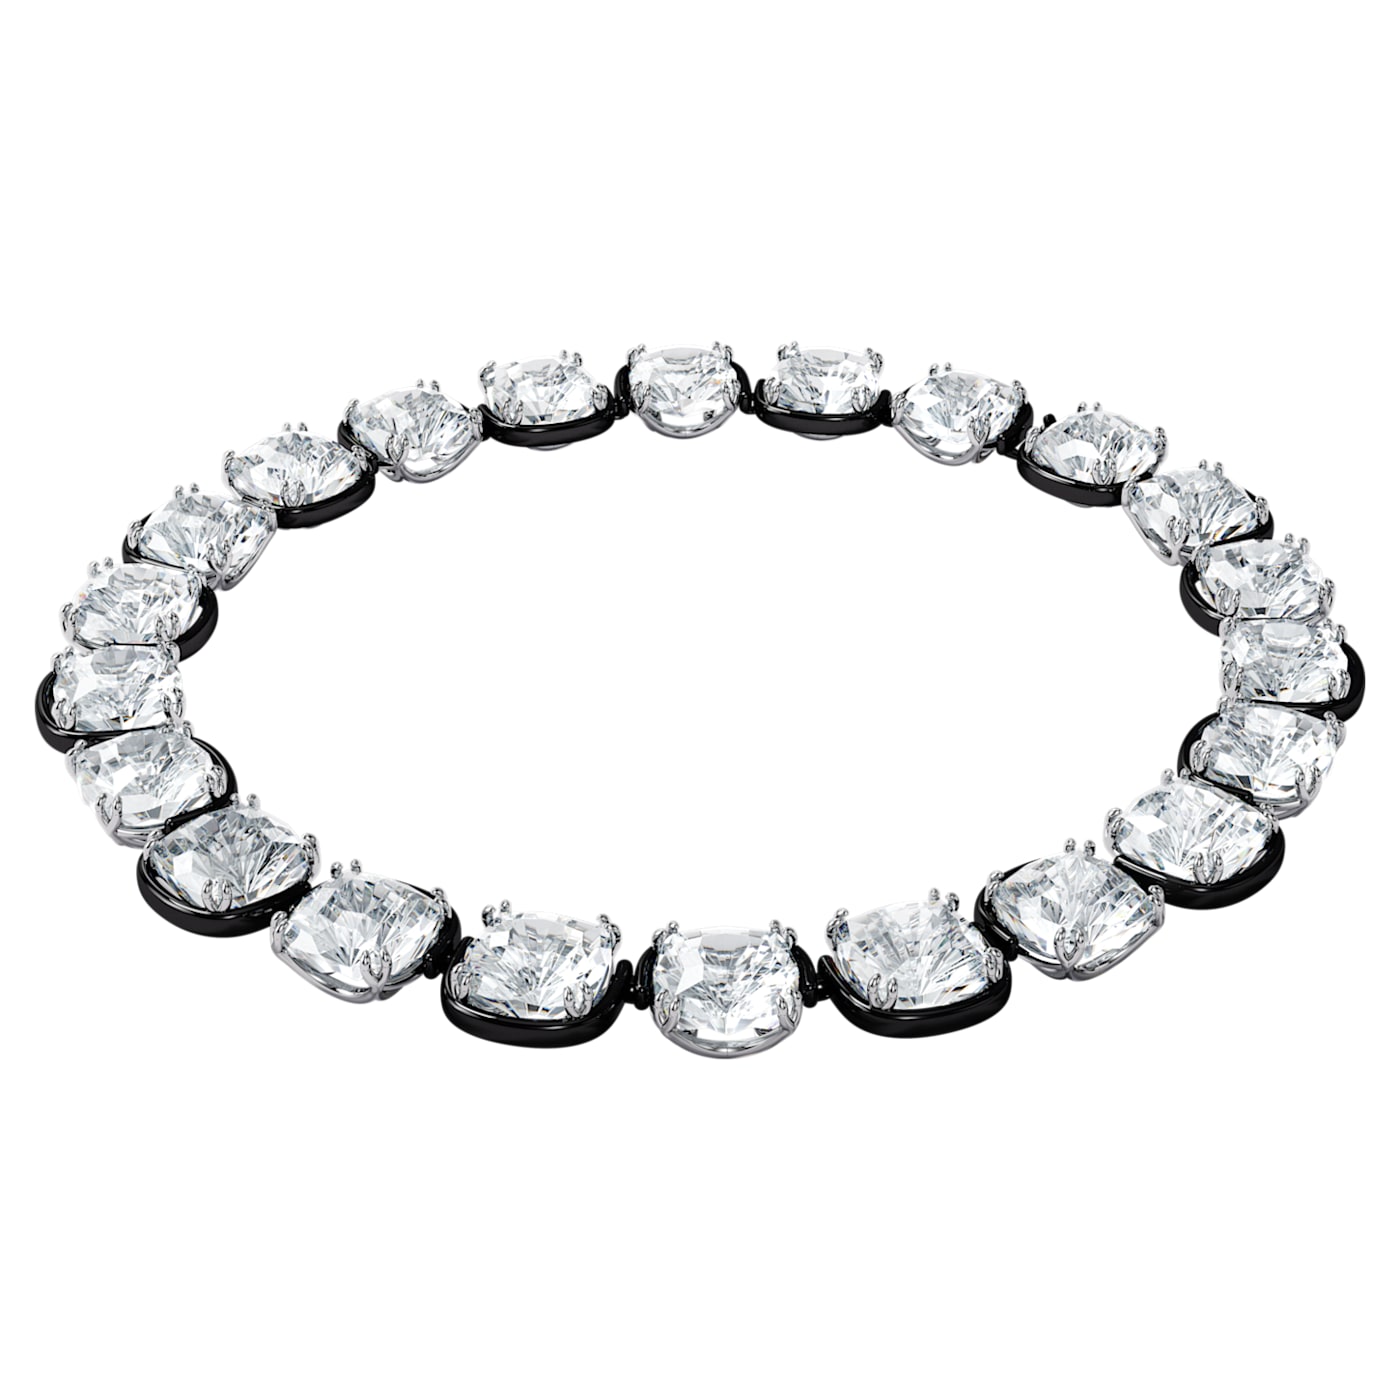 HARMONIA ALL AROUND CHOKER NECKLACE, CUSHION CUT CRYSTALS, WHITE, MIXED METAL